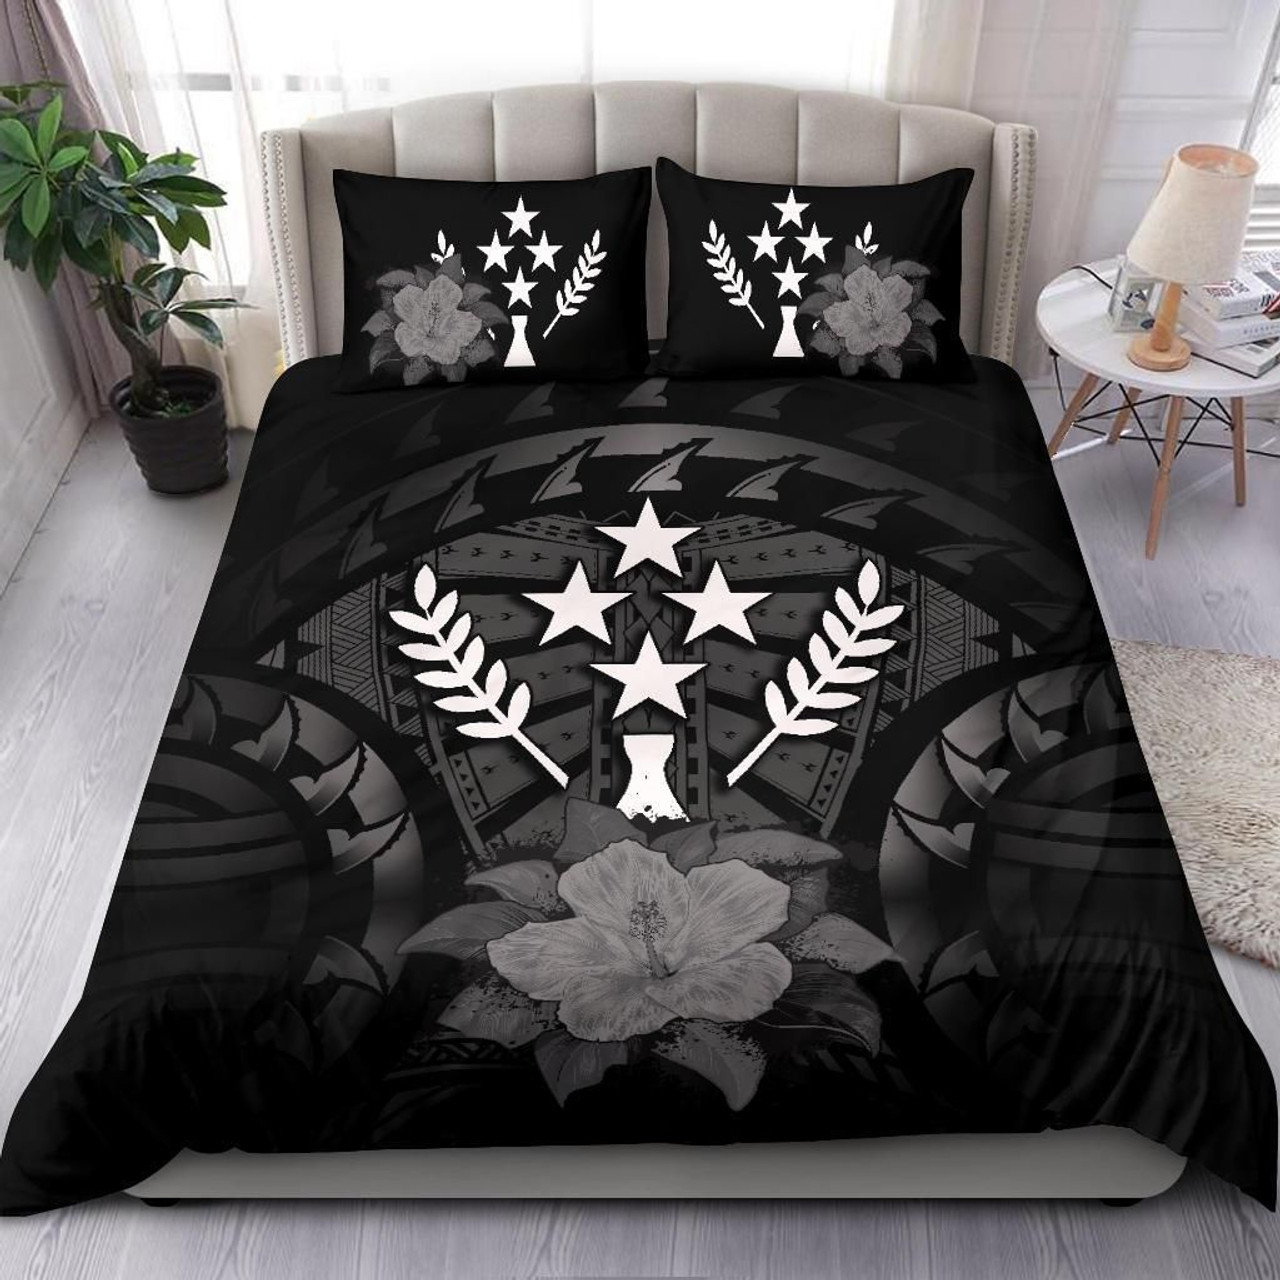 Polynesian Bedding Set Federated States Of Micronesia Duvet Cover Set Bright Style 5